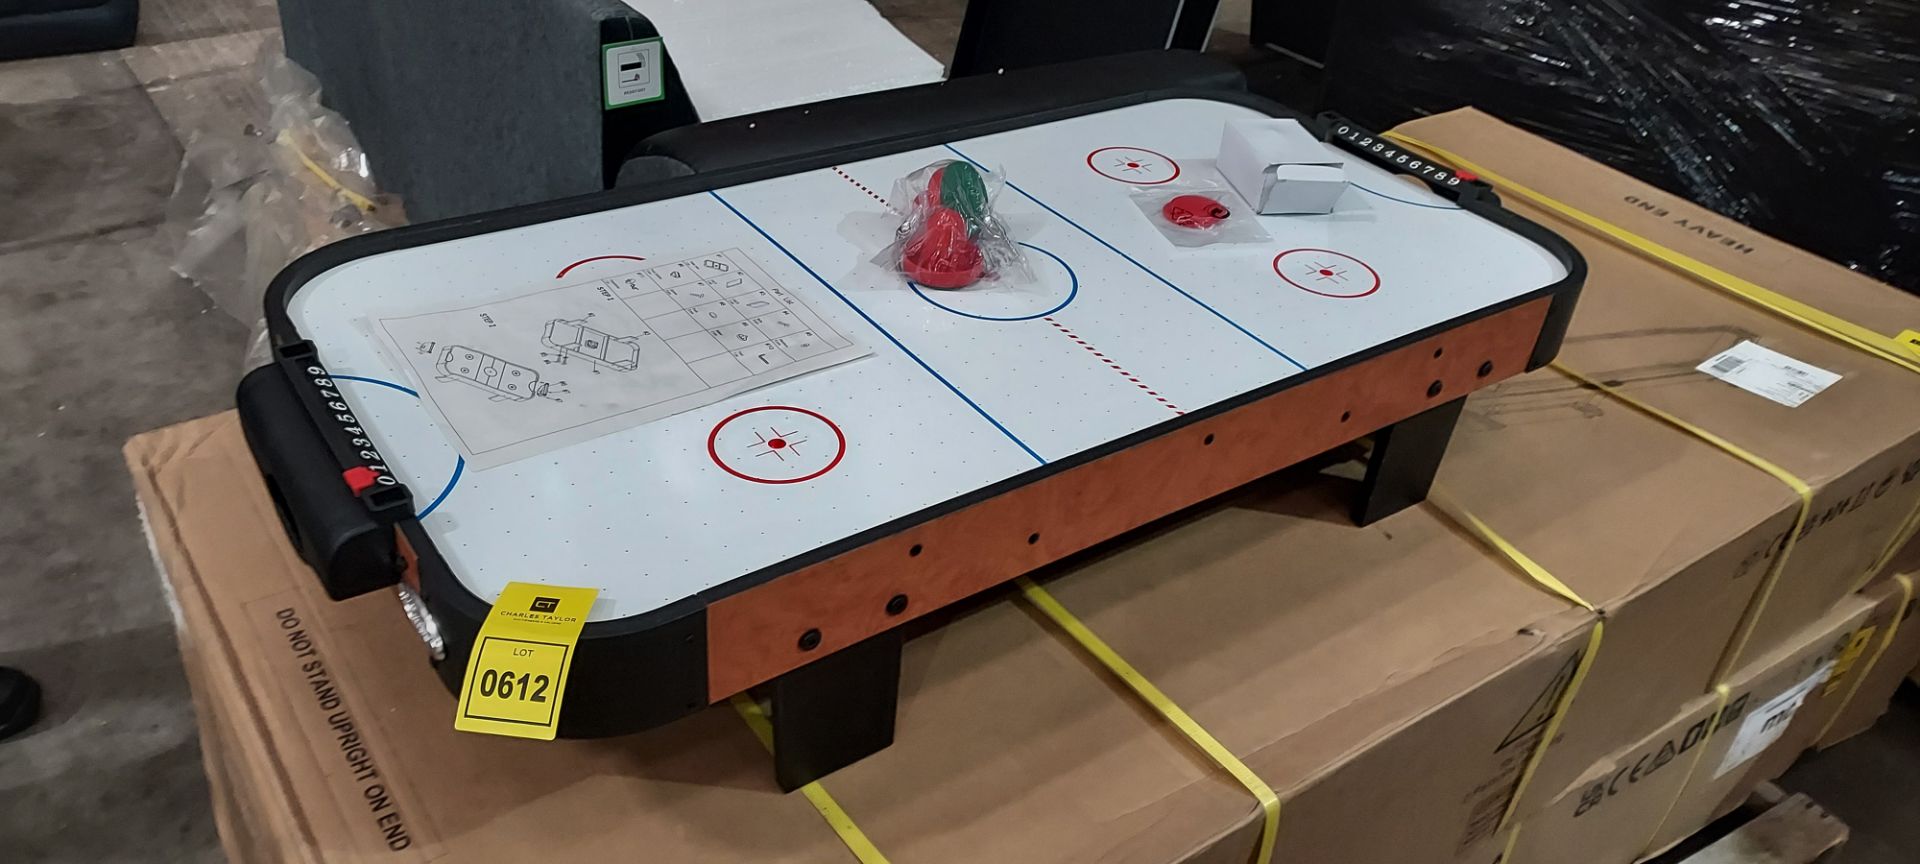 1 X GAMESSON 3.5 FT AIR HOCKEY TABLE - INCLUDES FAN / 2 PUCKS / 2 PUSHERS SIZE : 100 CM X 50 CM X 20